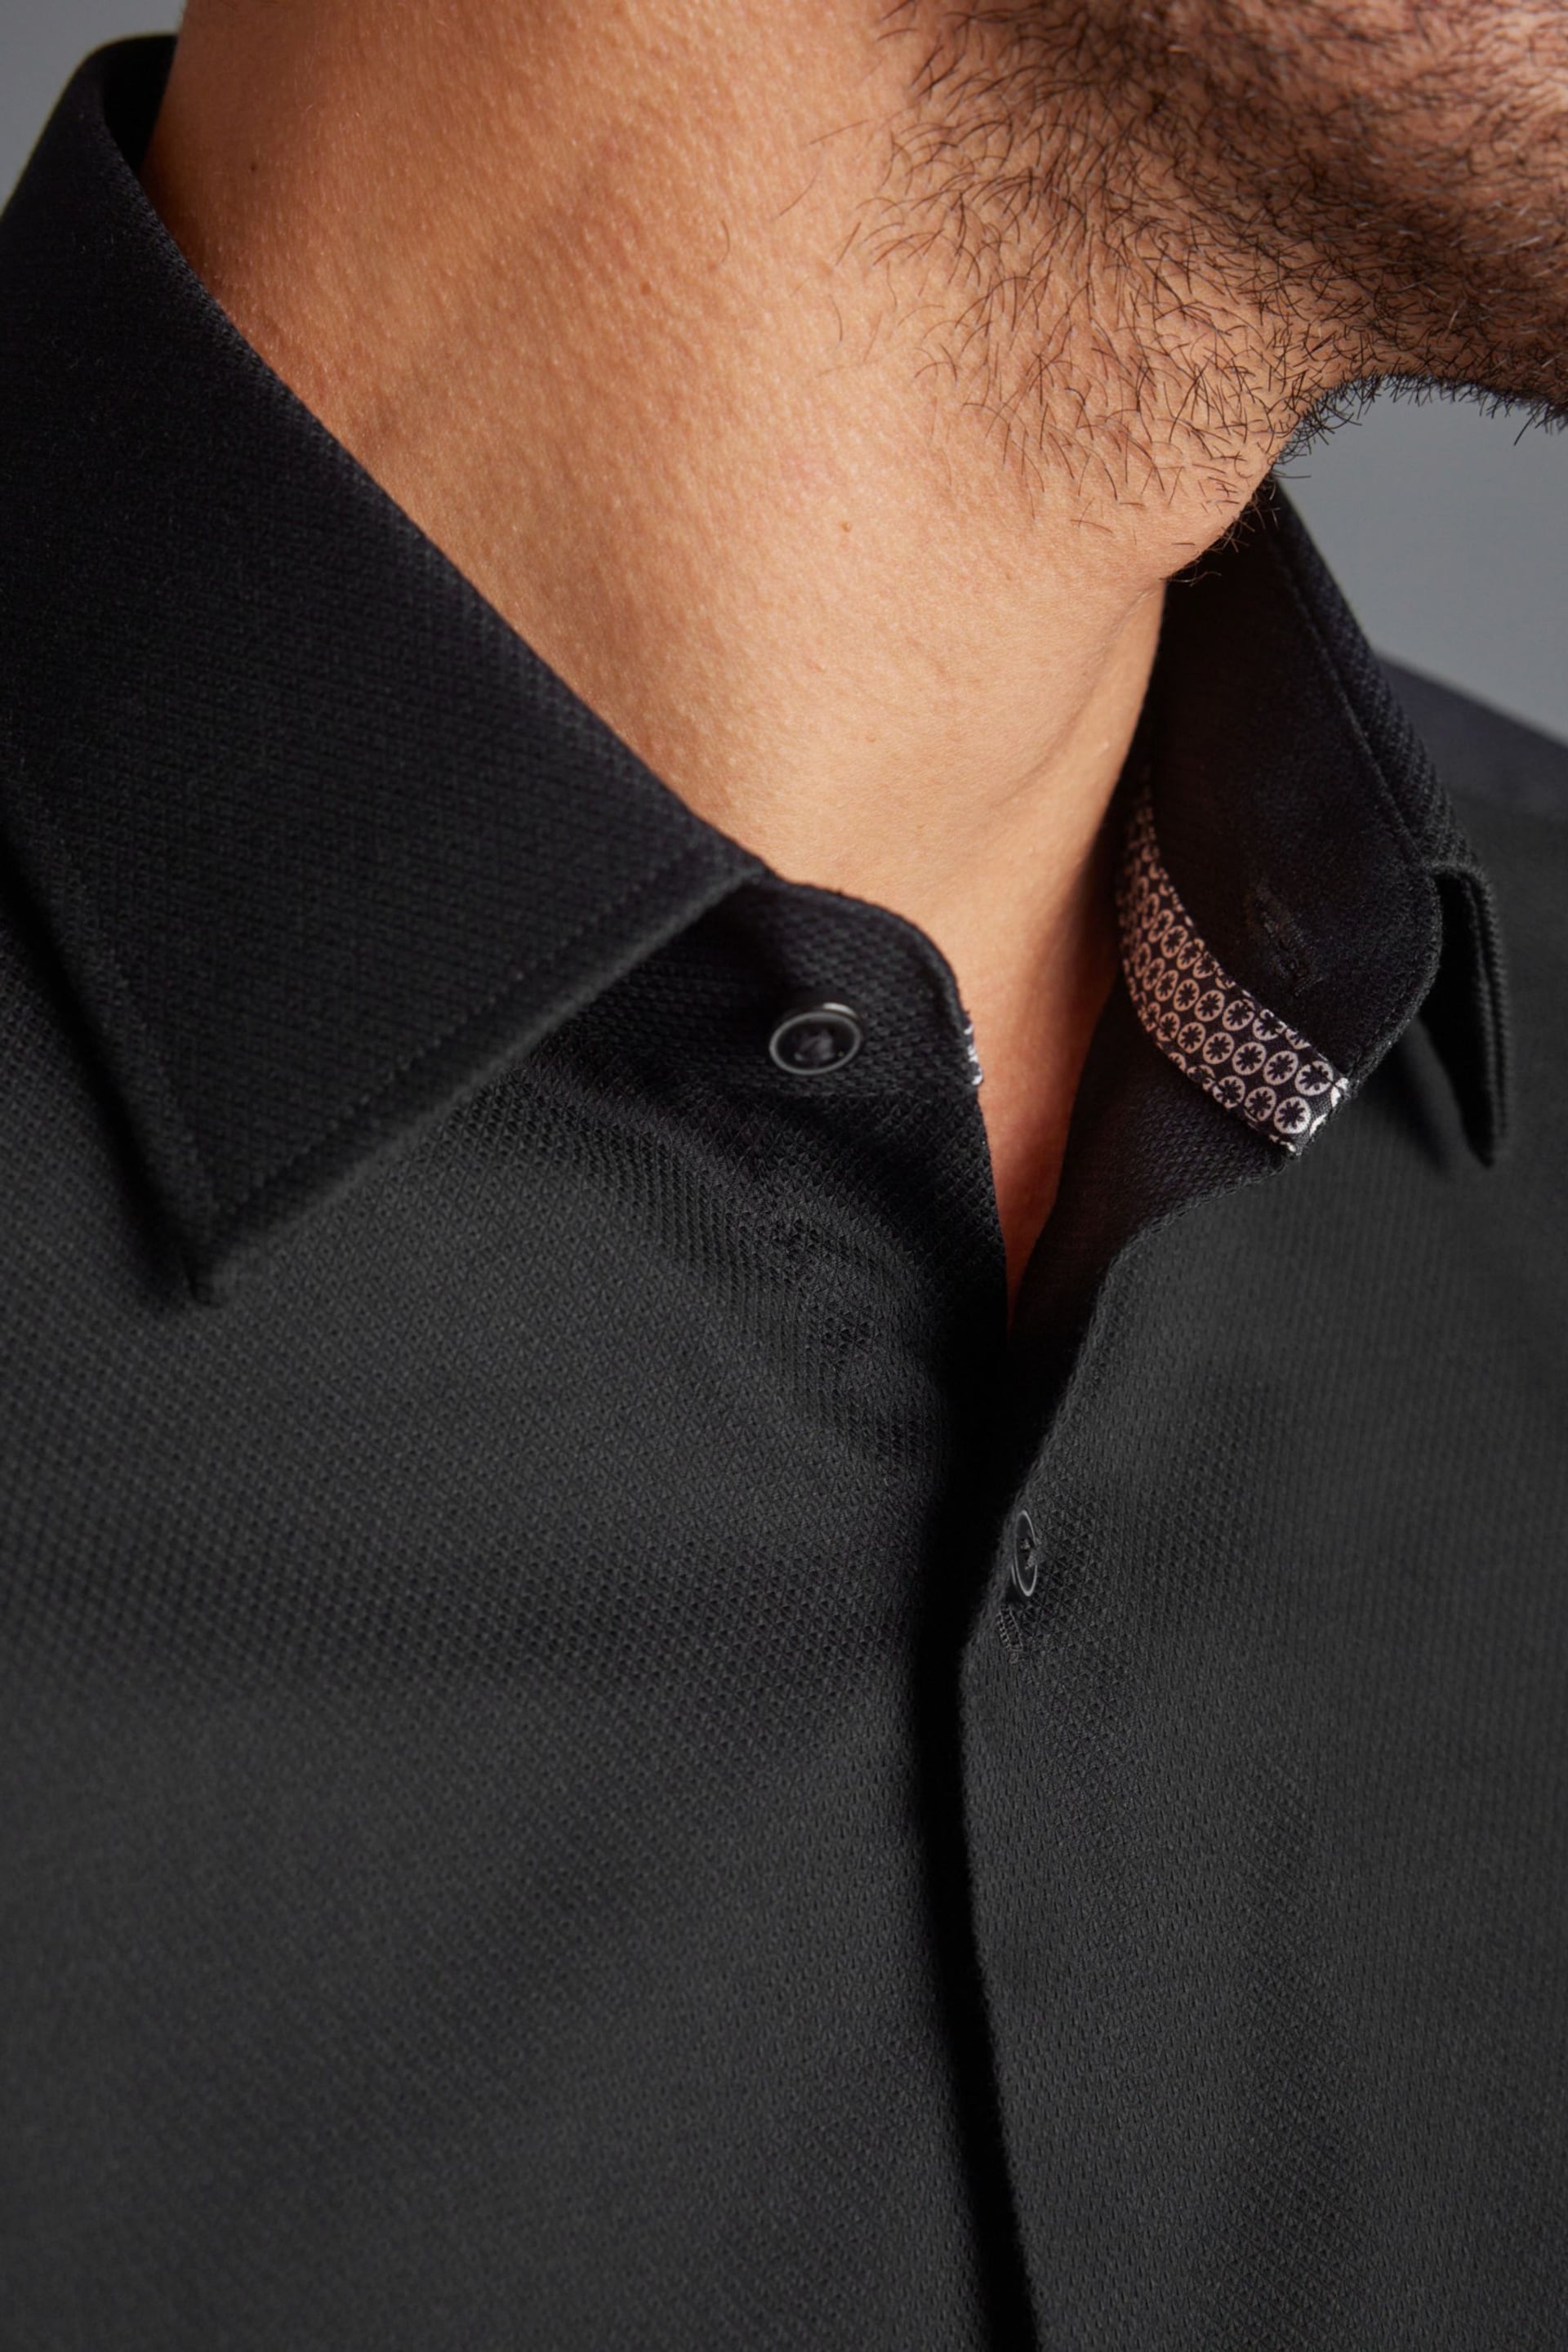 Black Slim Fit Signature Textured Single Cuff Shirt With Trim Detail - Image 4 of 8